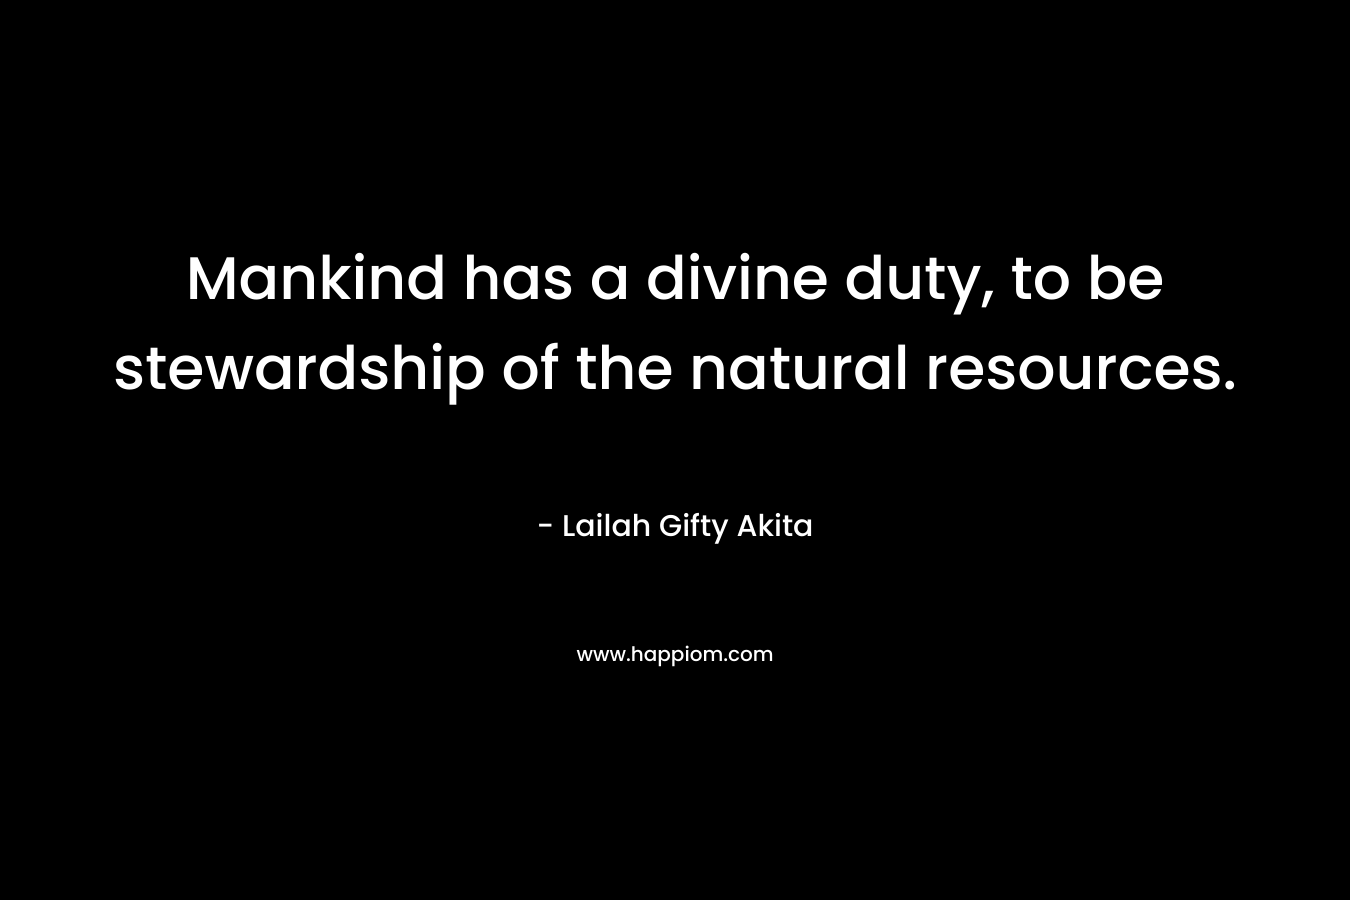 Mankind has a divine duty, to be stewardship of the natural resources. – Lailah Gifty Akita